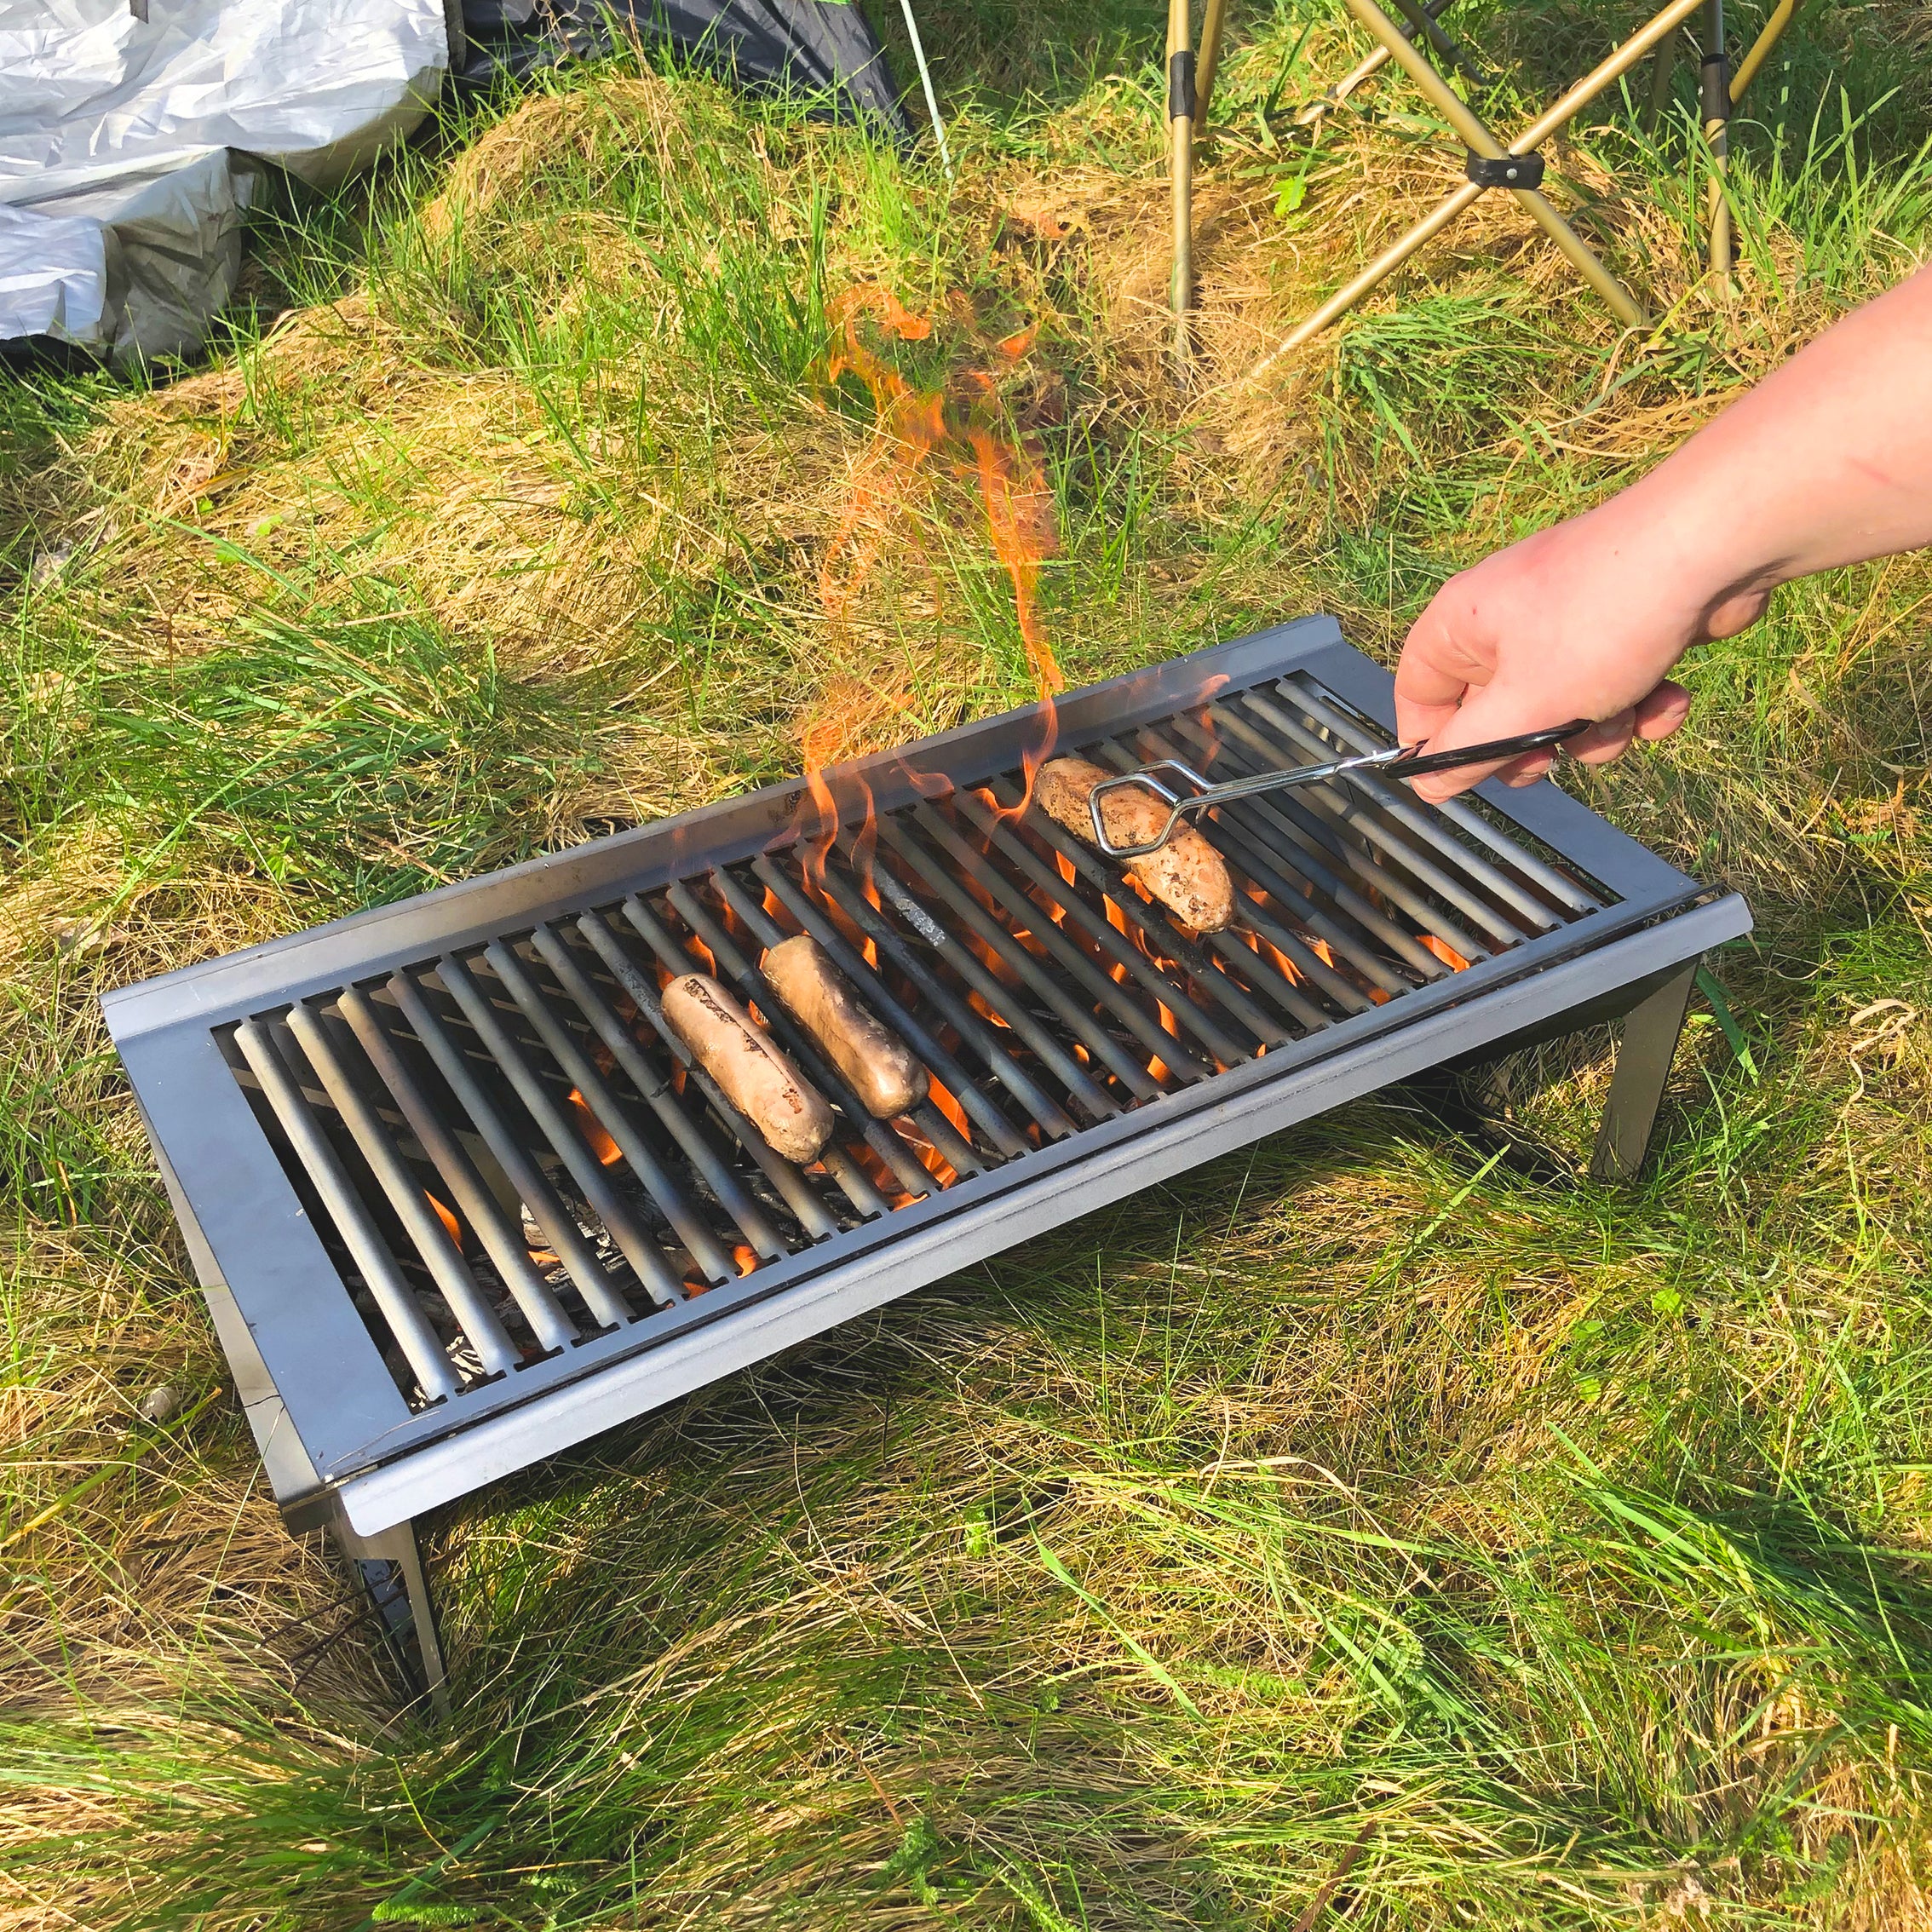 Portable Grill Top BBQ - Larger Size for Cooking - Full Flat-Pack